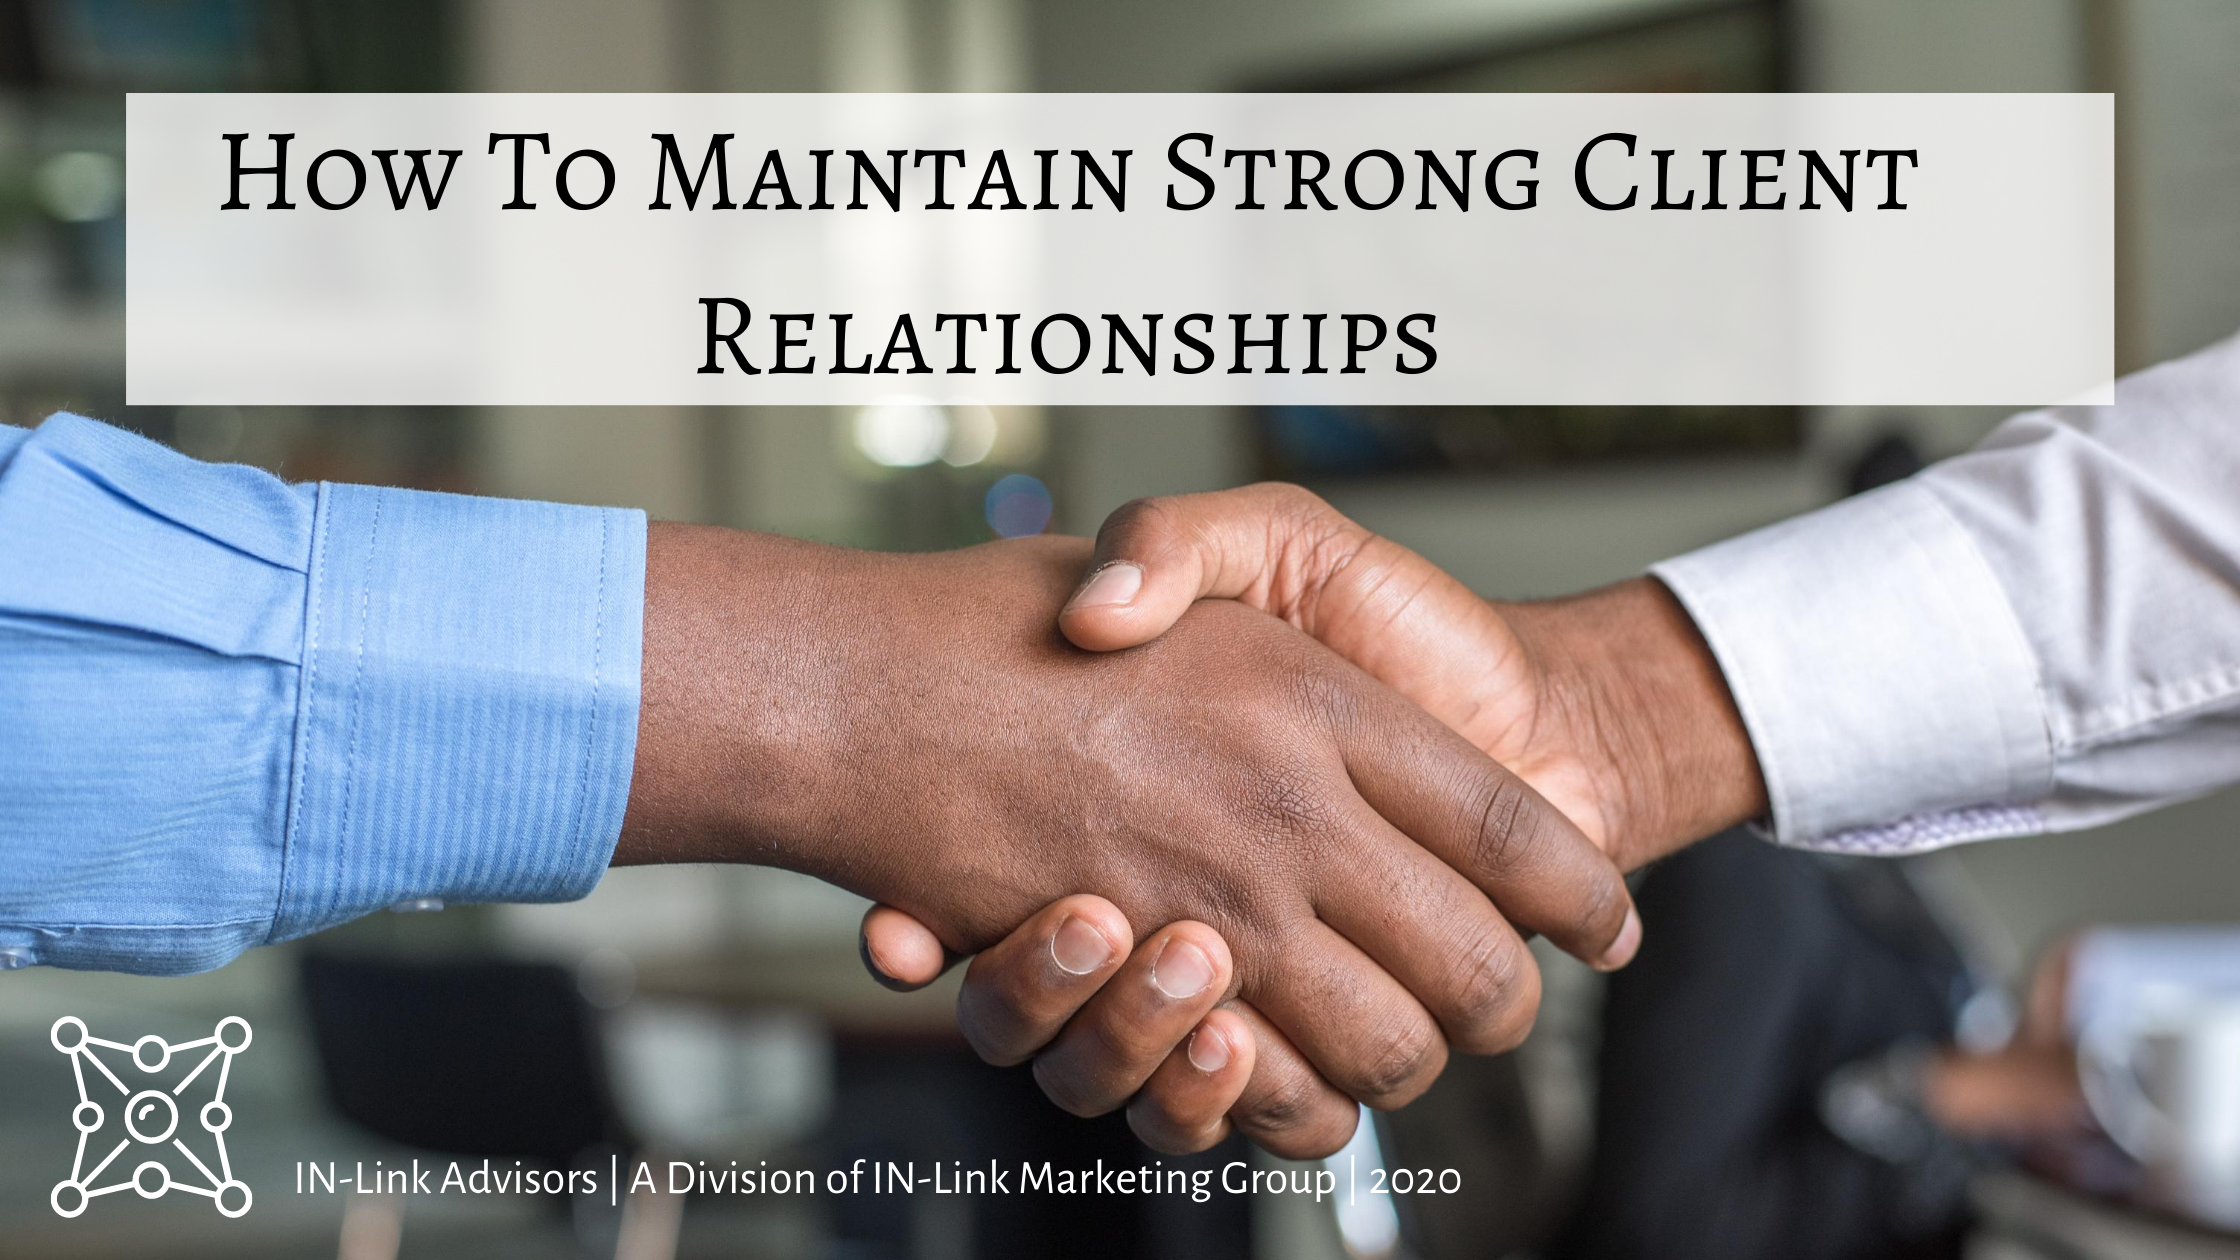 how to maintain strong client relationships, in-link advisors, cold-click, cold-click marketing, business relationships, client relationships, grow your business, be relatable